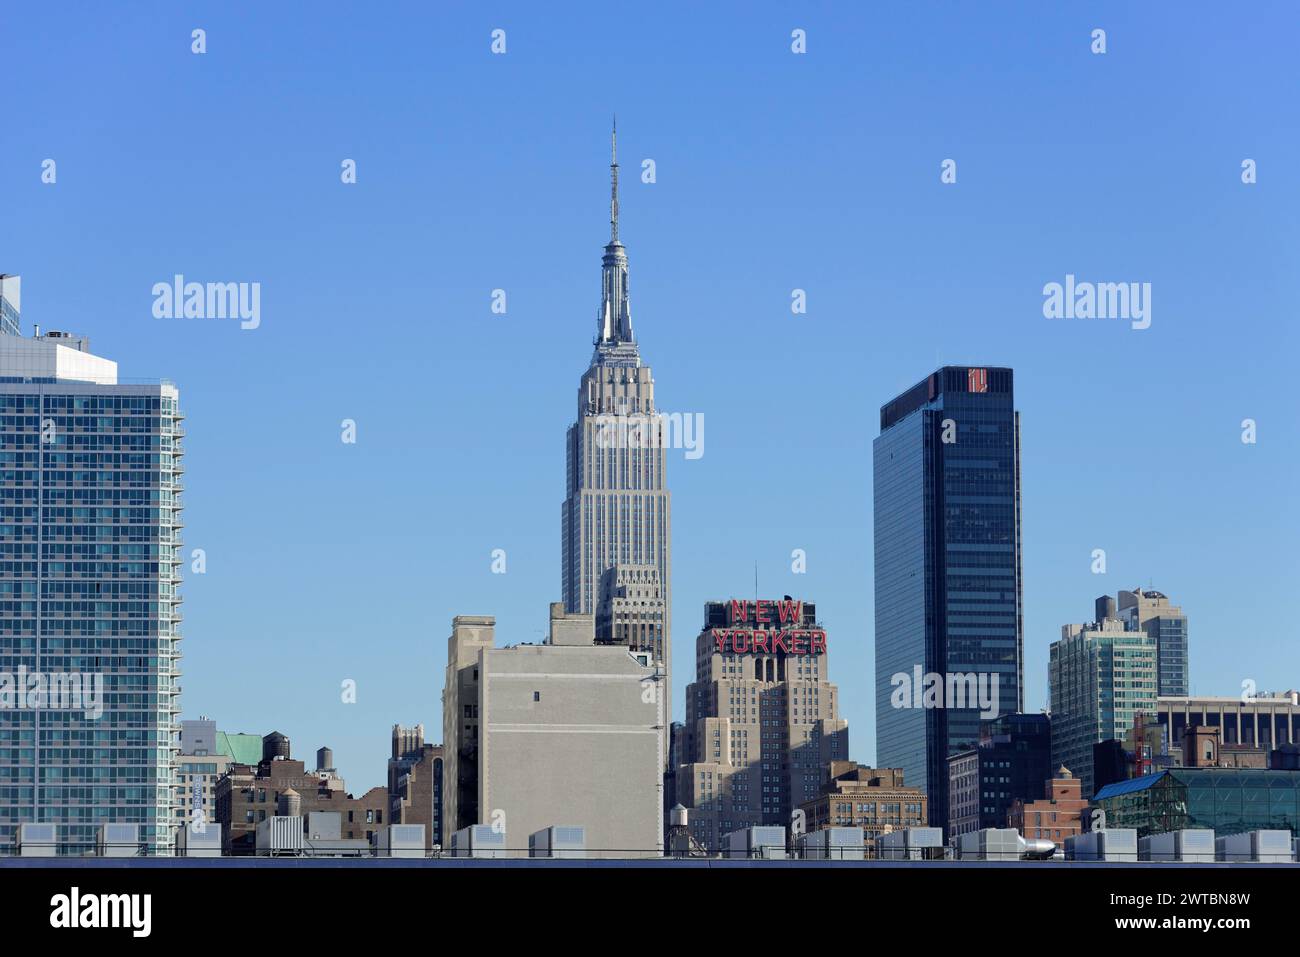 View of the Empire State Building surrounded by other skyscrapers, on the East River, Manhattan, Brooklyn, New York City, New York, USA, North America Stock Photo